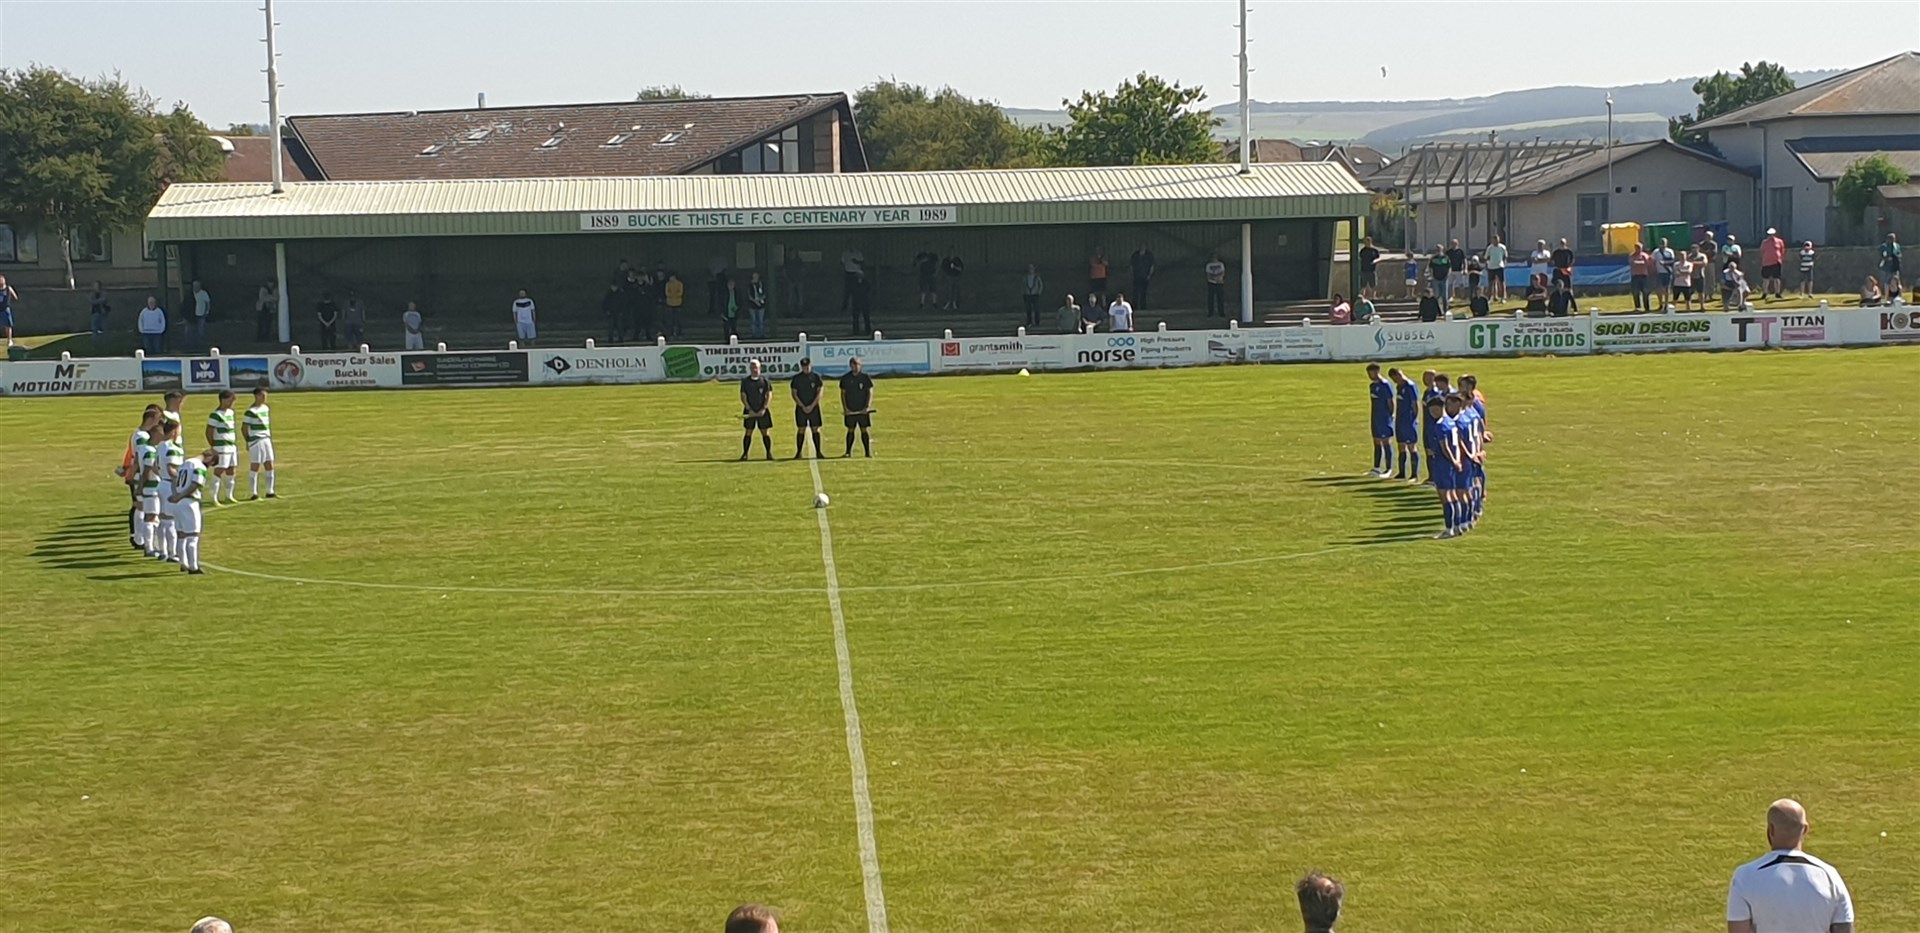 A minute's silence befor the game.